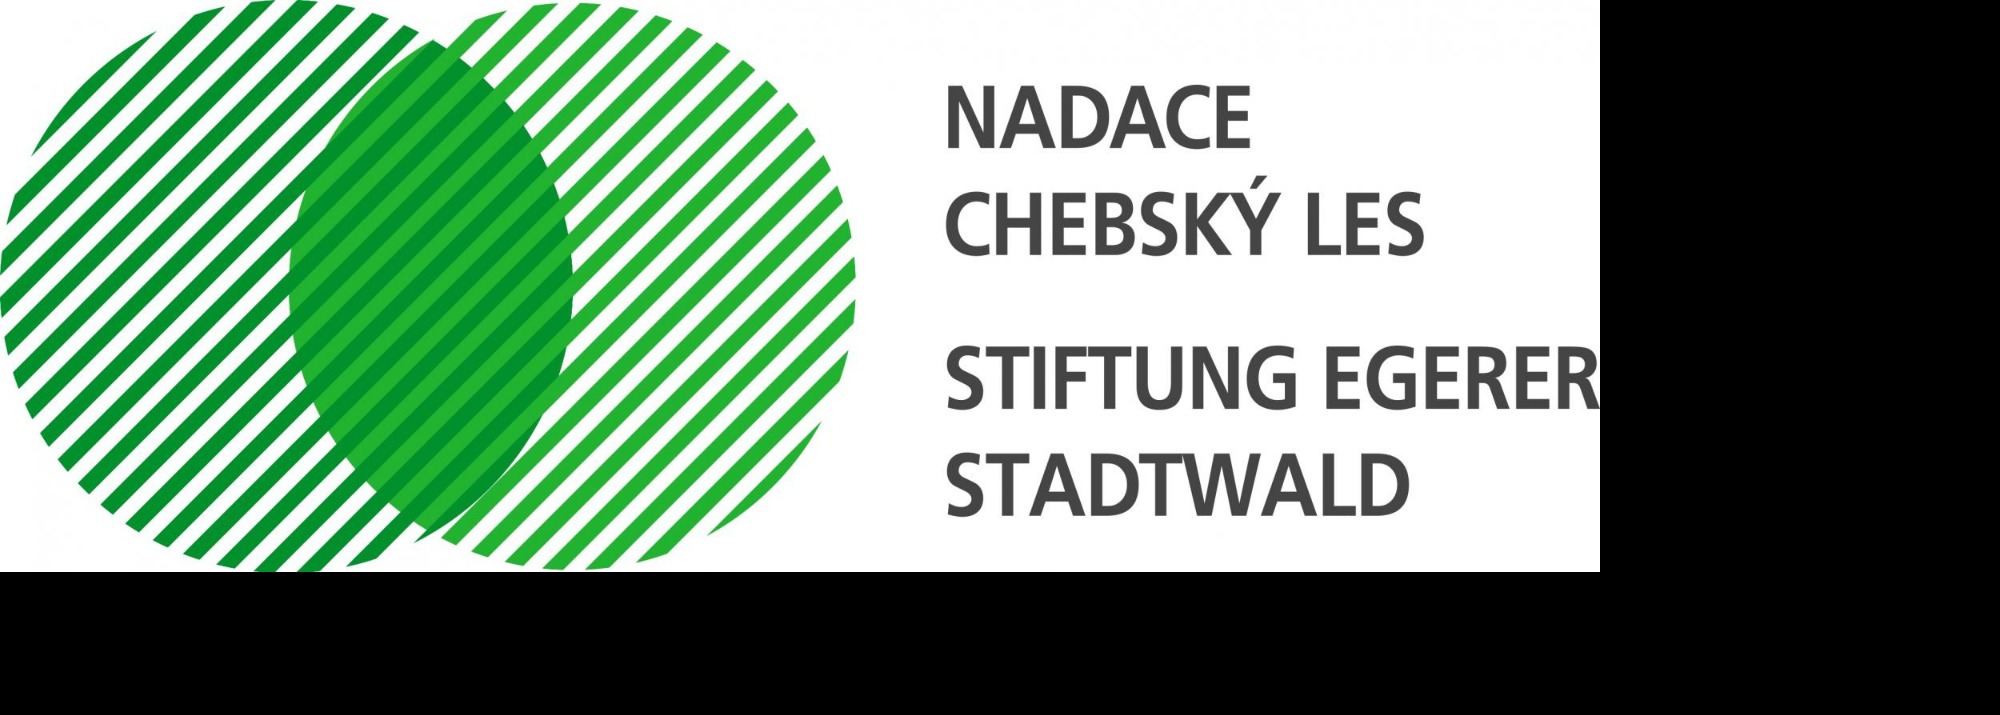 Nadace Chebský les